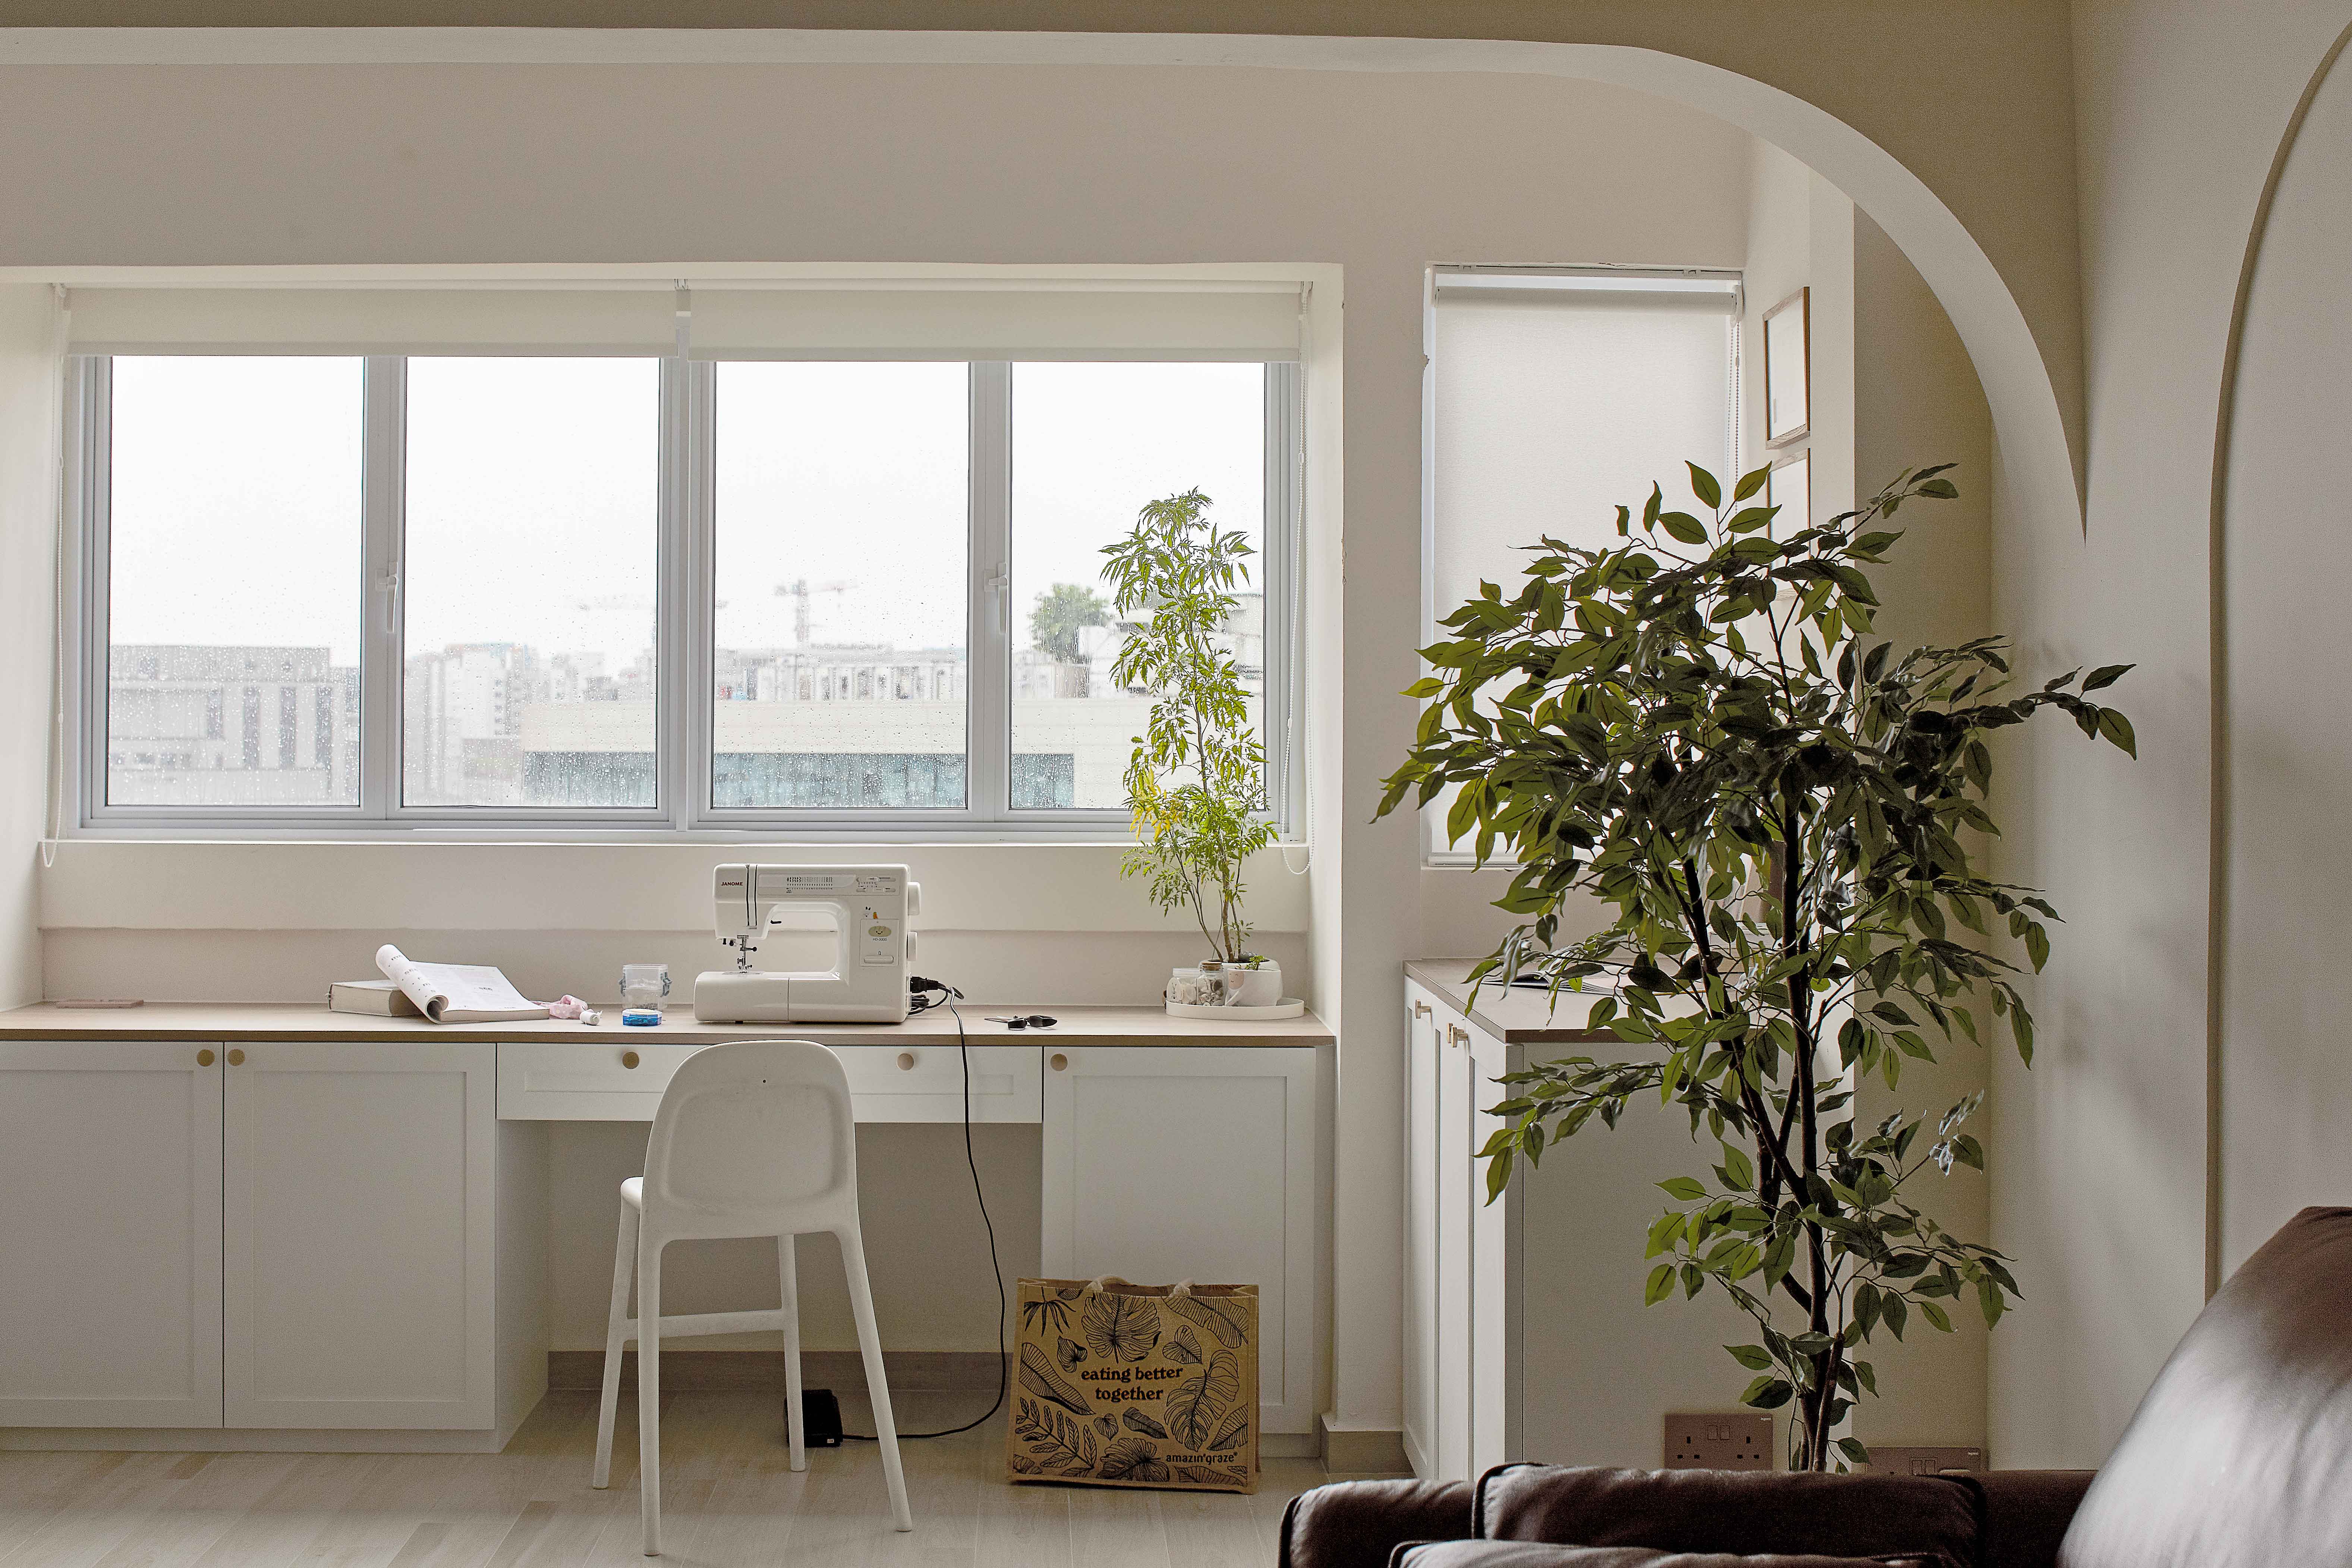 Scandinavian home office with indoor plants, white desk, and large windows for natural light.